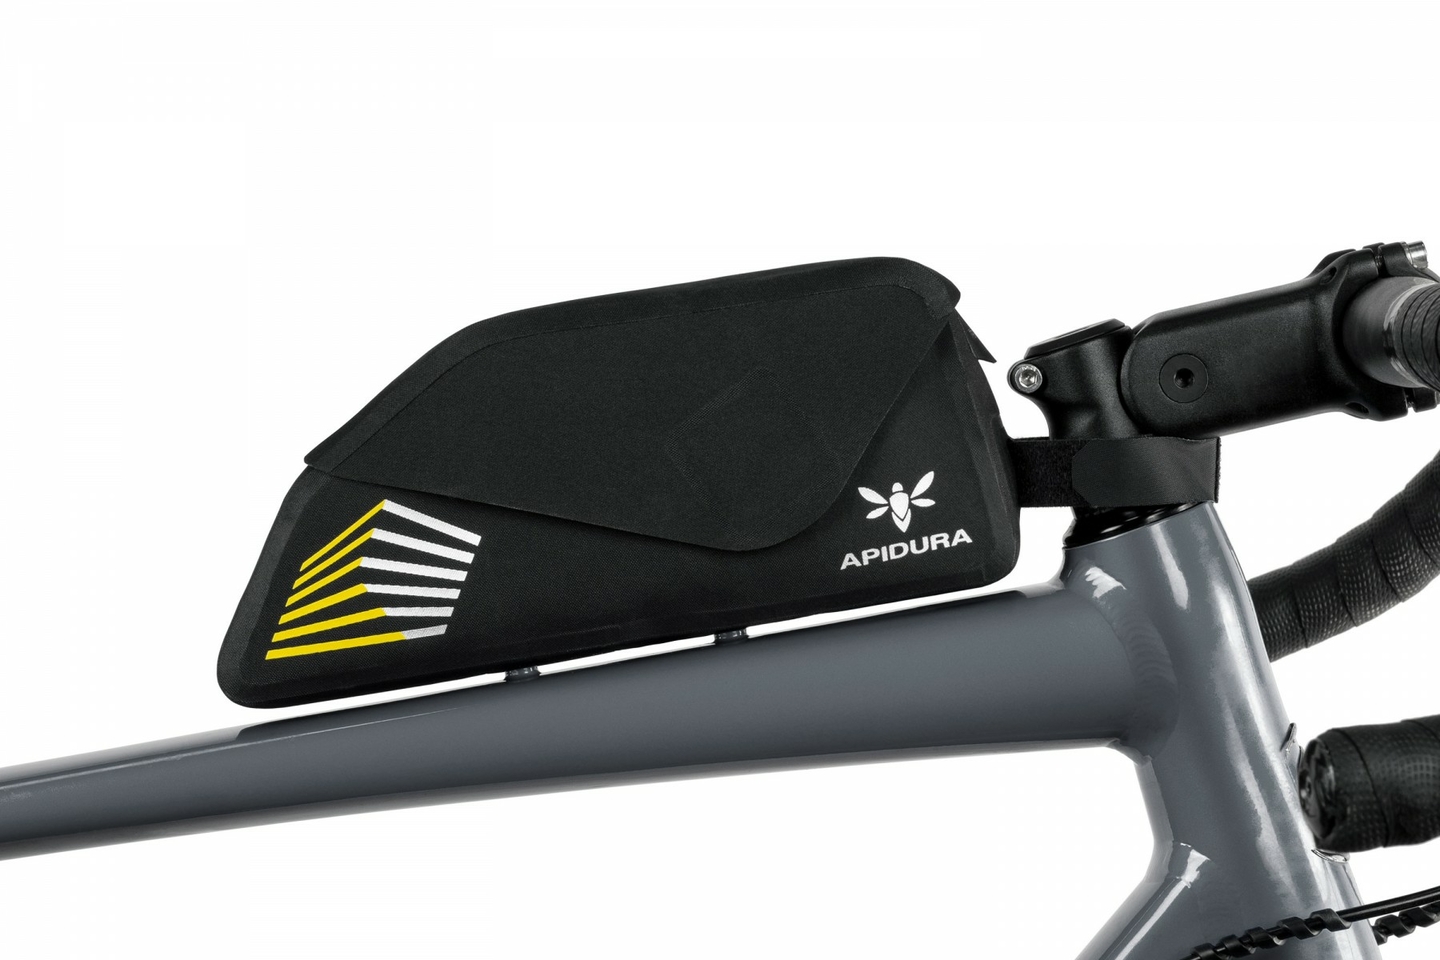 apidura-racing-bolt-on-top-tube-pack-1l-on-bike-1-hires